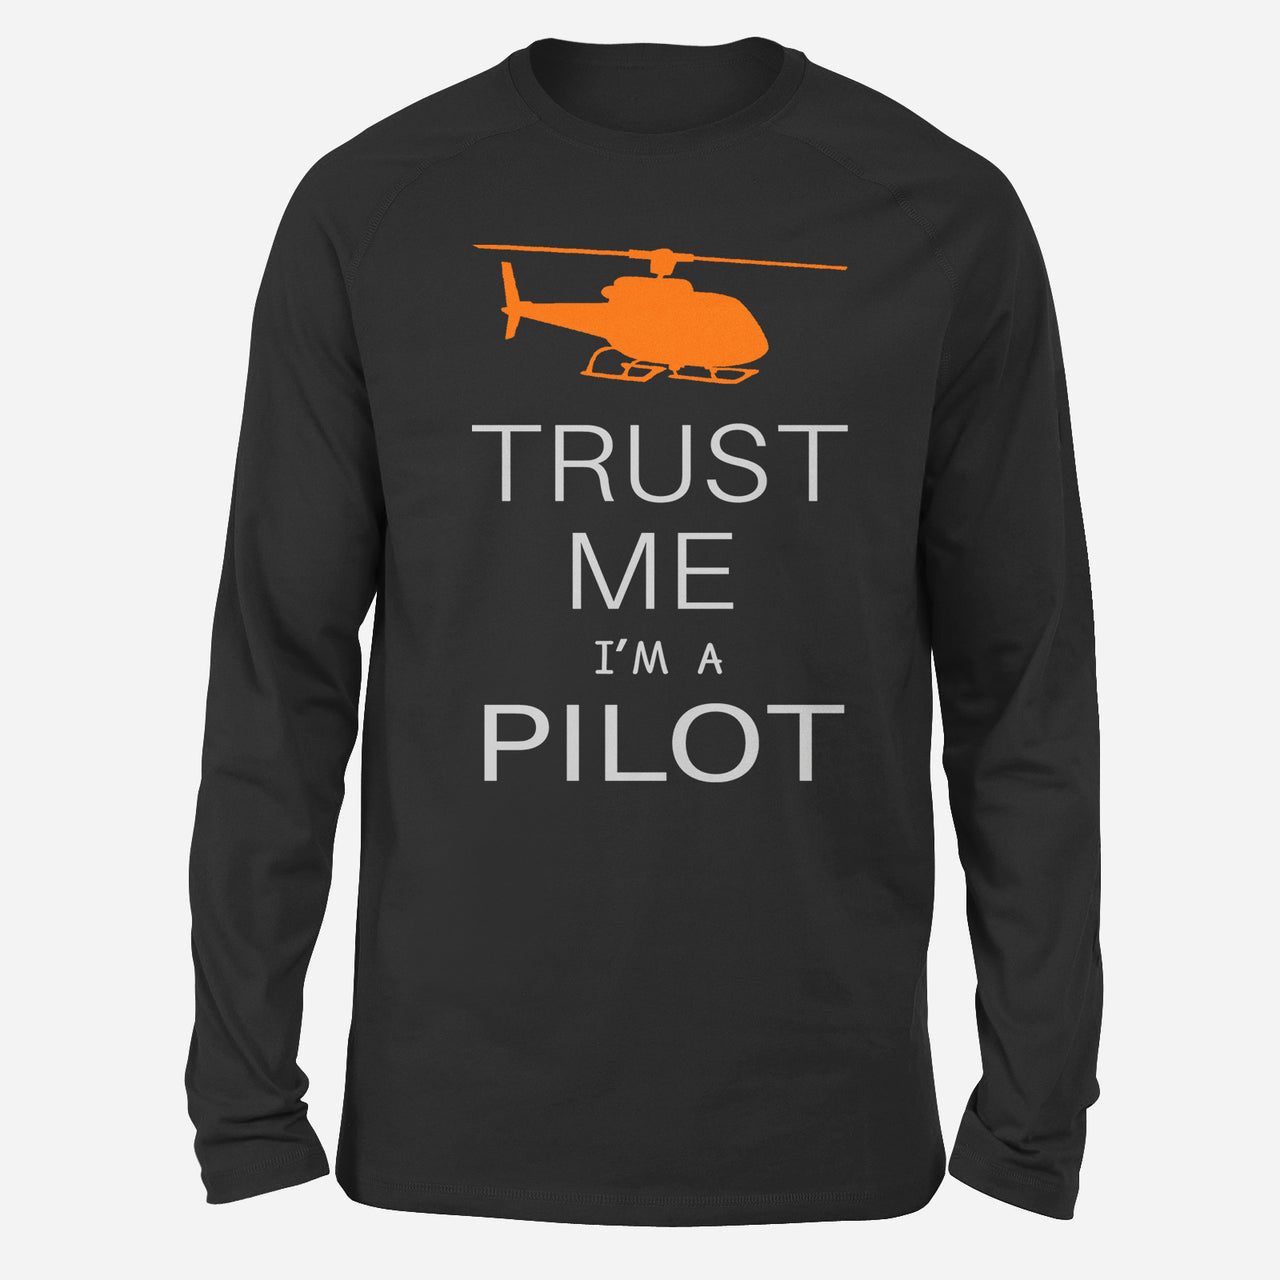 Trust Me I'm a Pilot (Helicopter) Designed Long-Sleeve T-Shirts